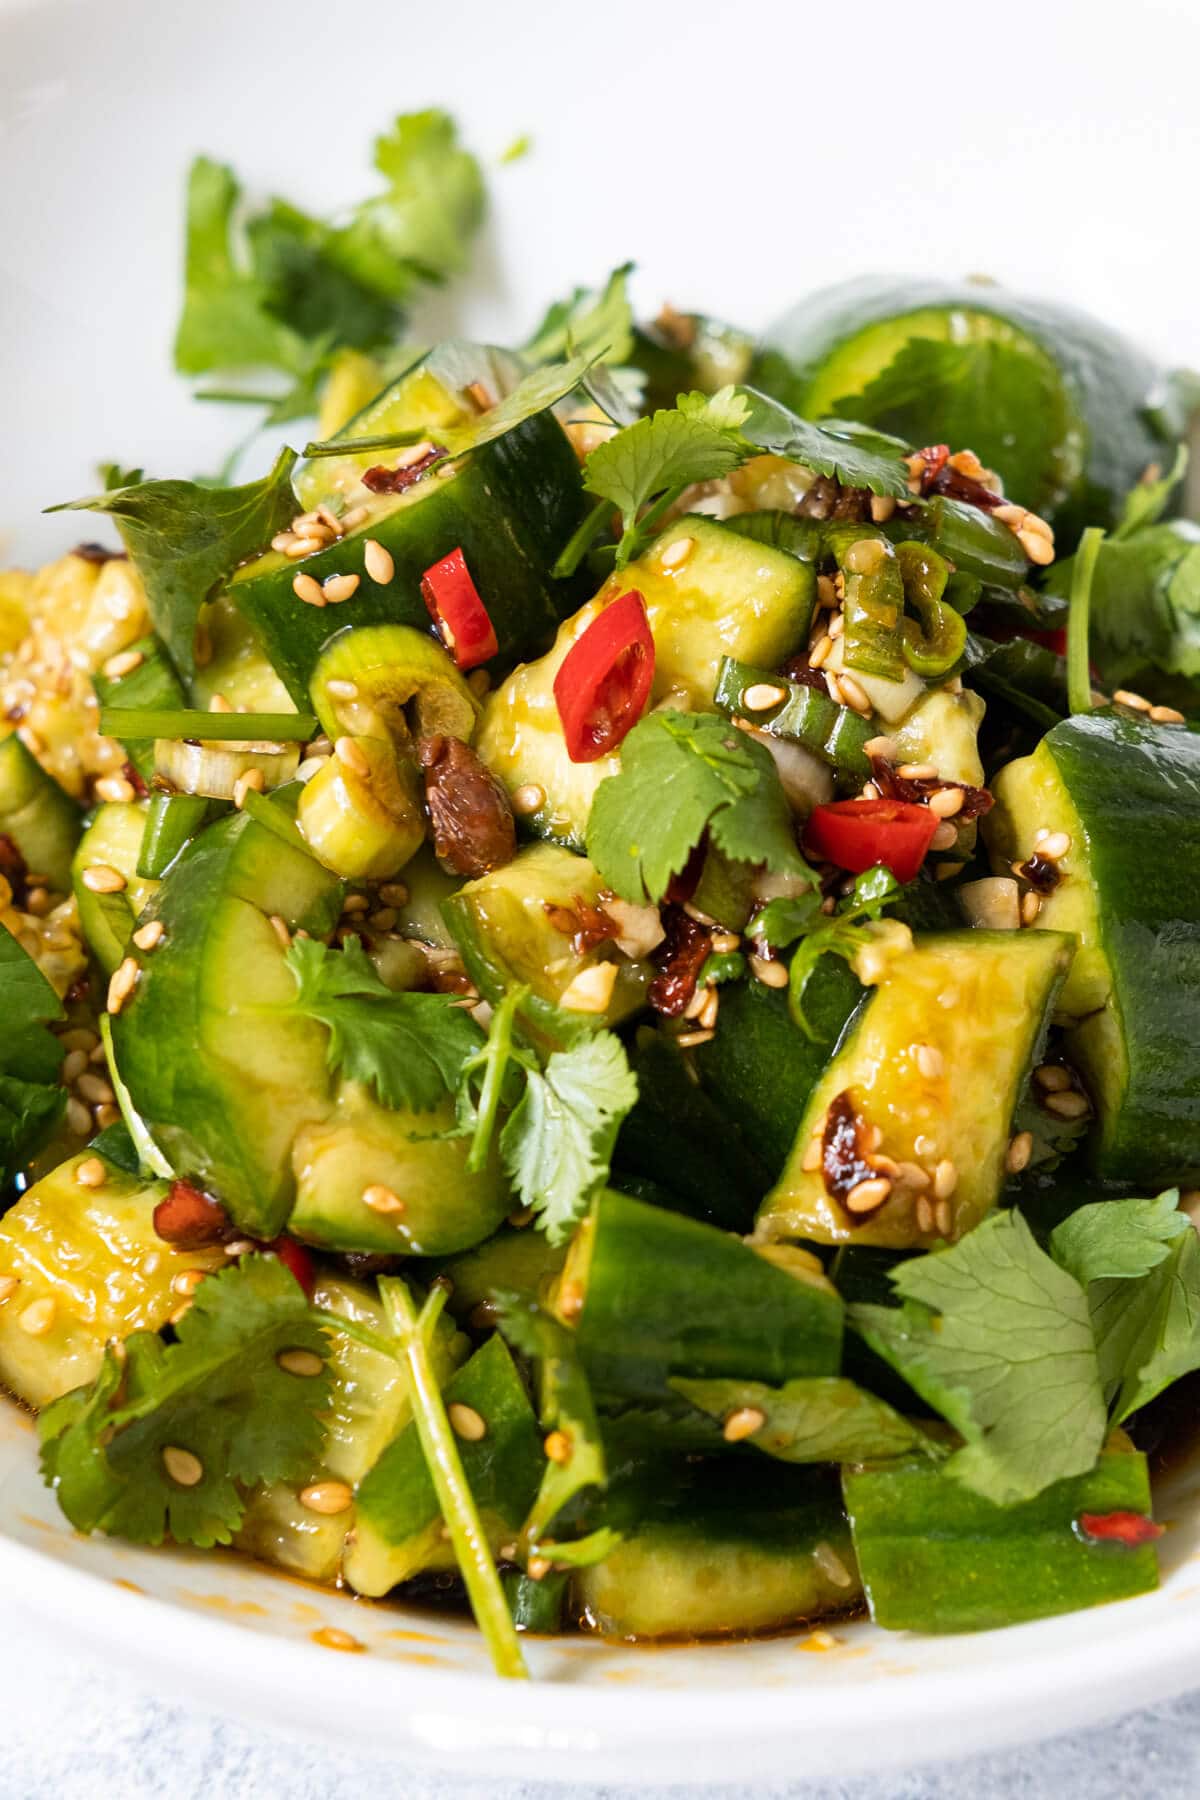 Crispy smashed cucumber tossed with a spicy and sour dressing and topped with chopped red pepper, spicy chili crisp, white sesame seeds and cilantro.  